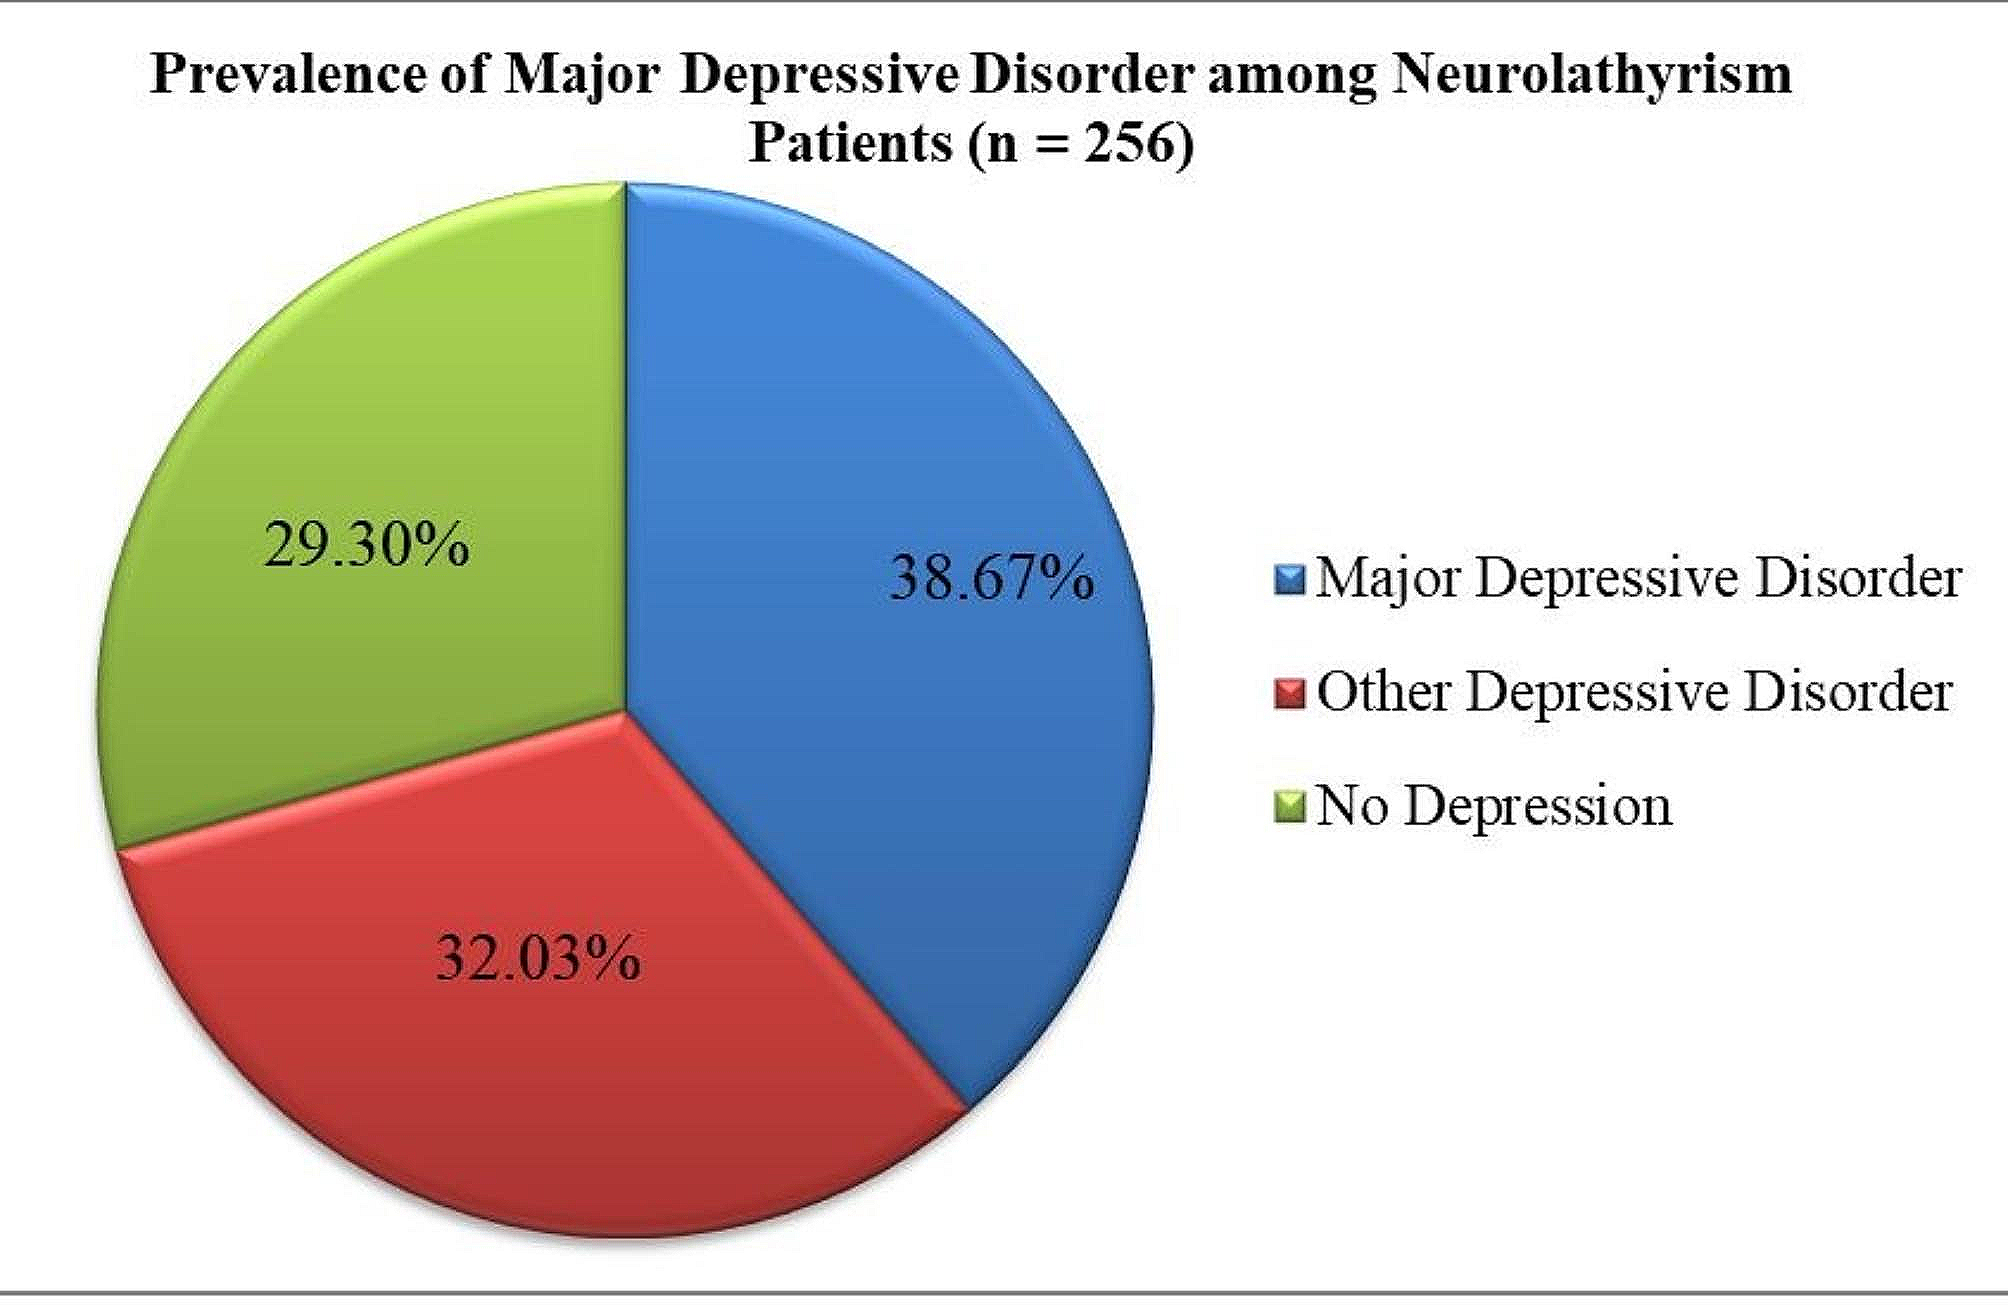 Prevalence of major depressive disorder and its associated factors among adult patients with neurolathyrism in Dawunt District, Ethiopia; 2022: community-based cross-sectional study